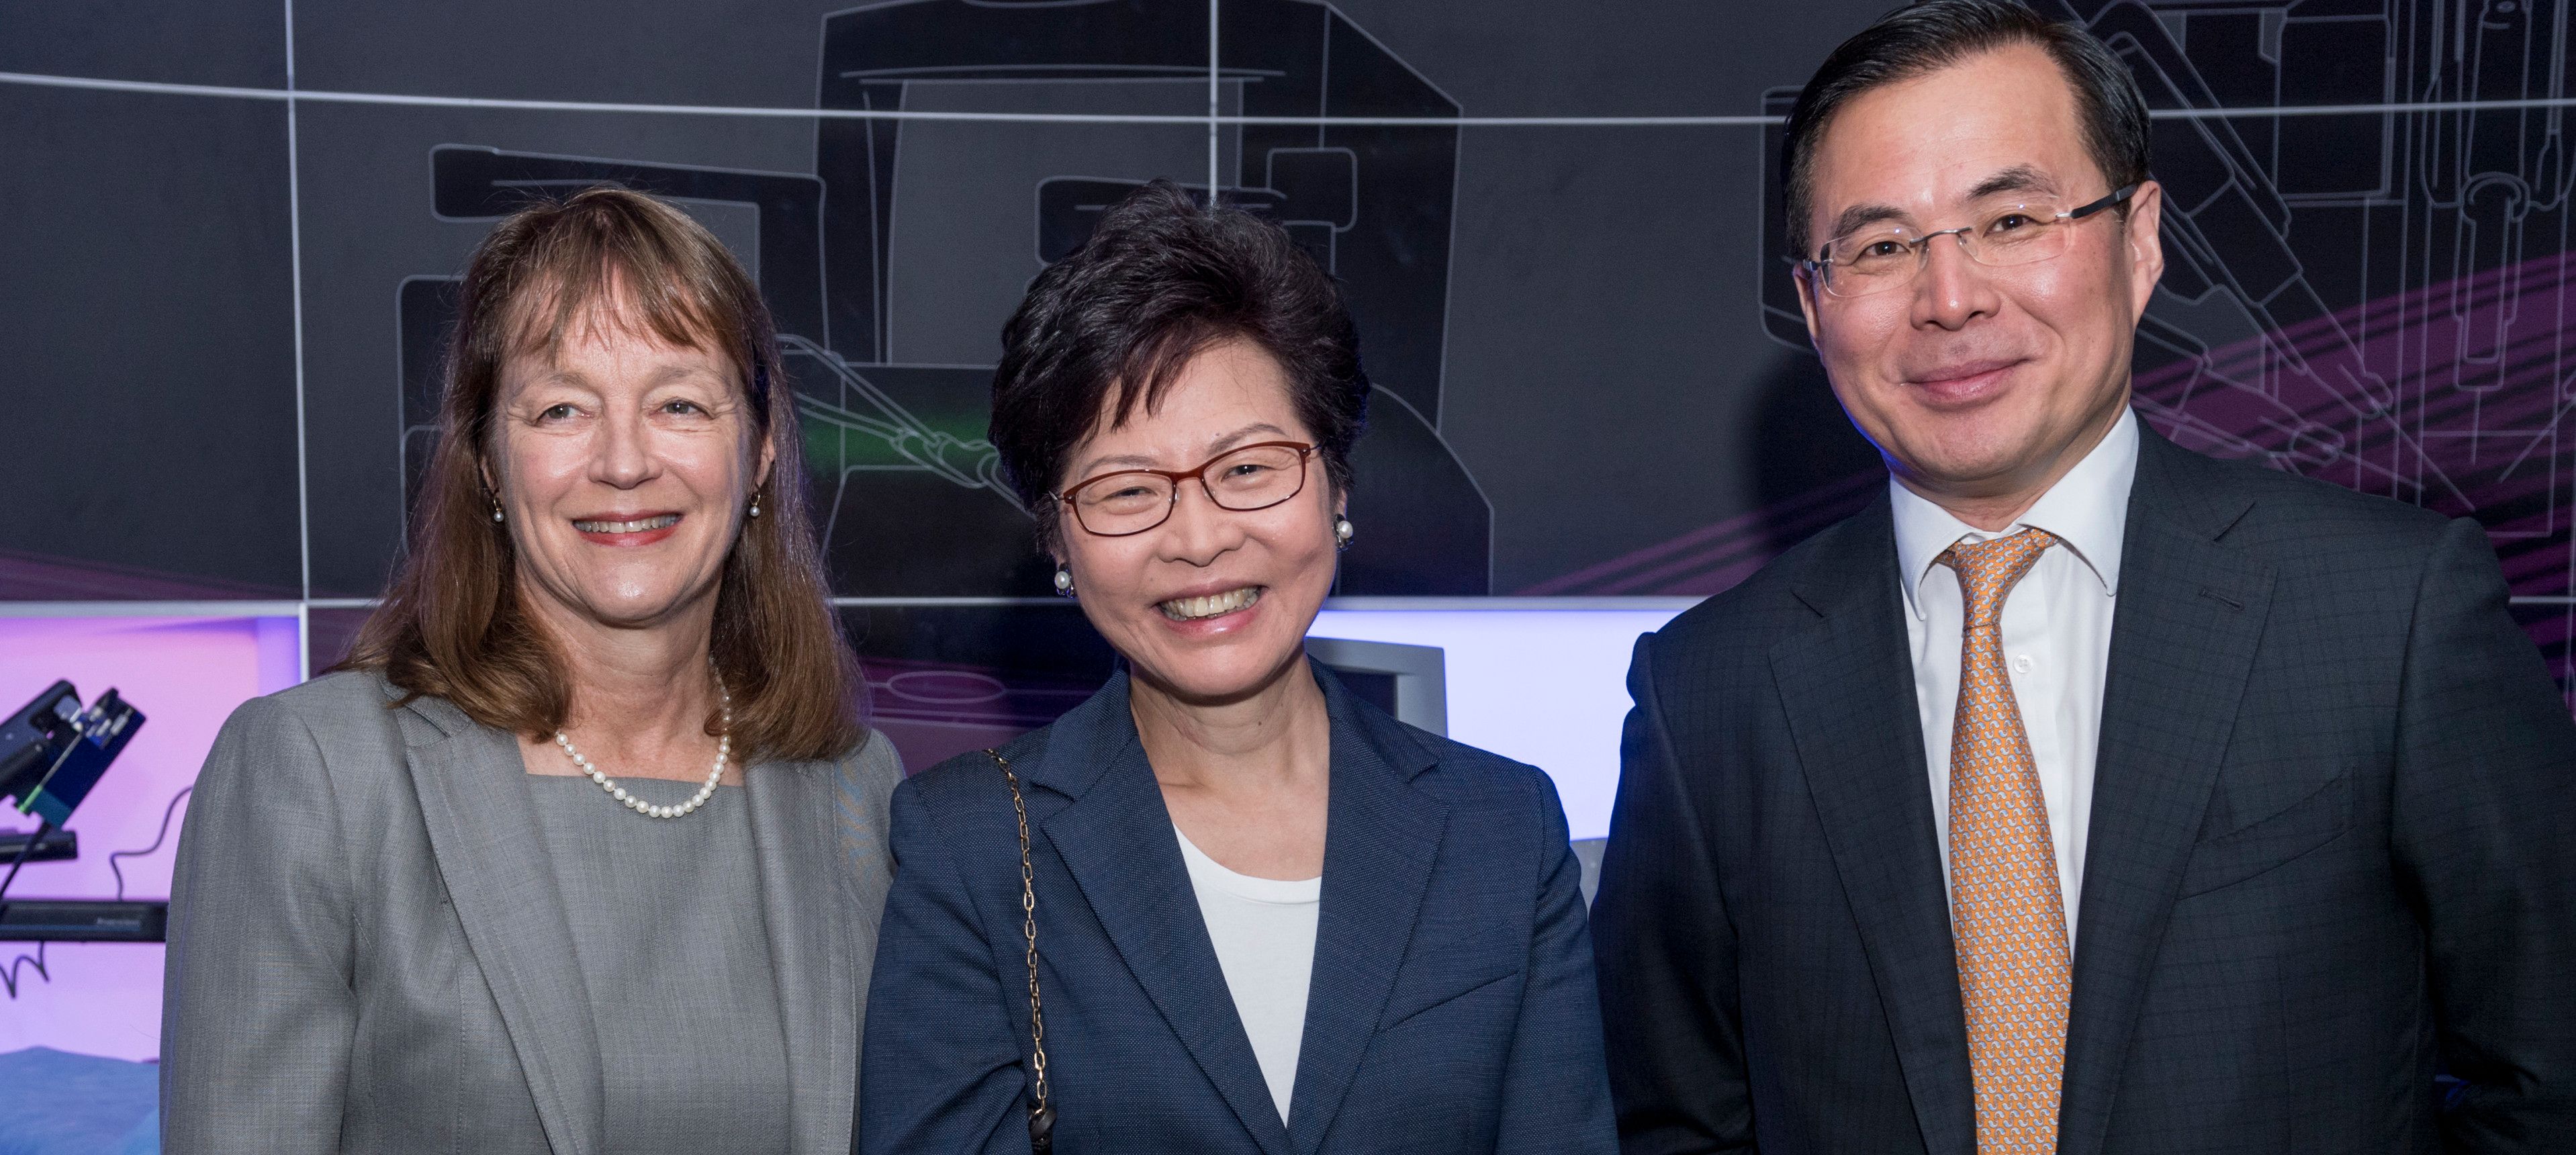 Imperial's President Alice Gast and Hong Kong's Chief Executive Carrie Lam